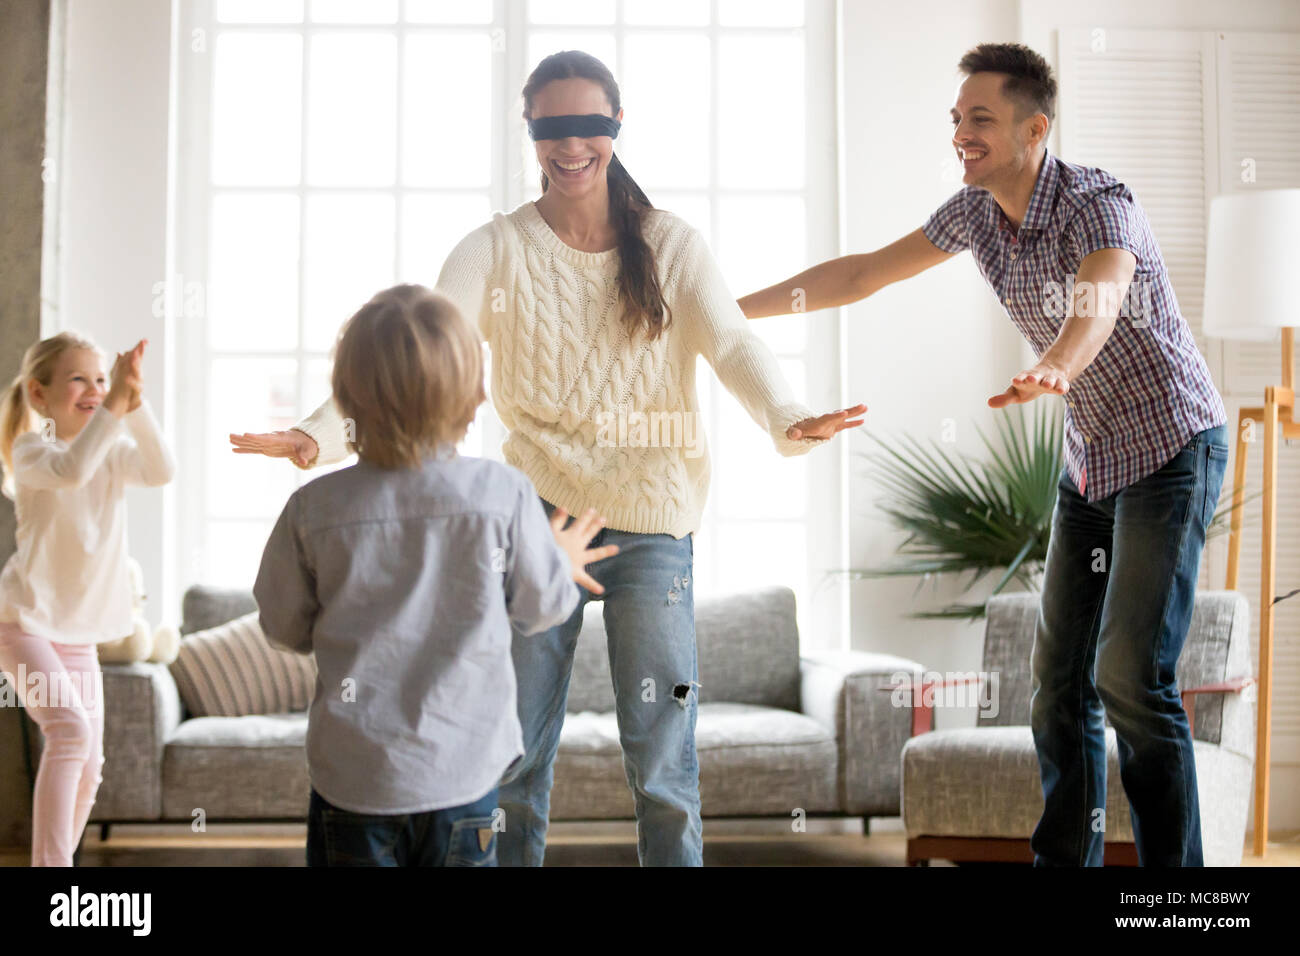 Family playing hide and seek game together with blindfolded mother, happy kids and parents having fun in living room, children hiding clapping hands e Stock Photo